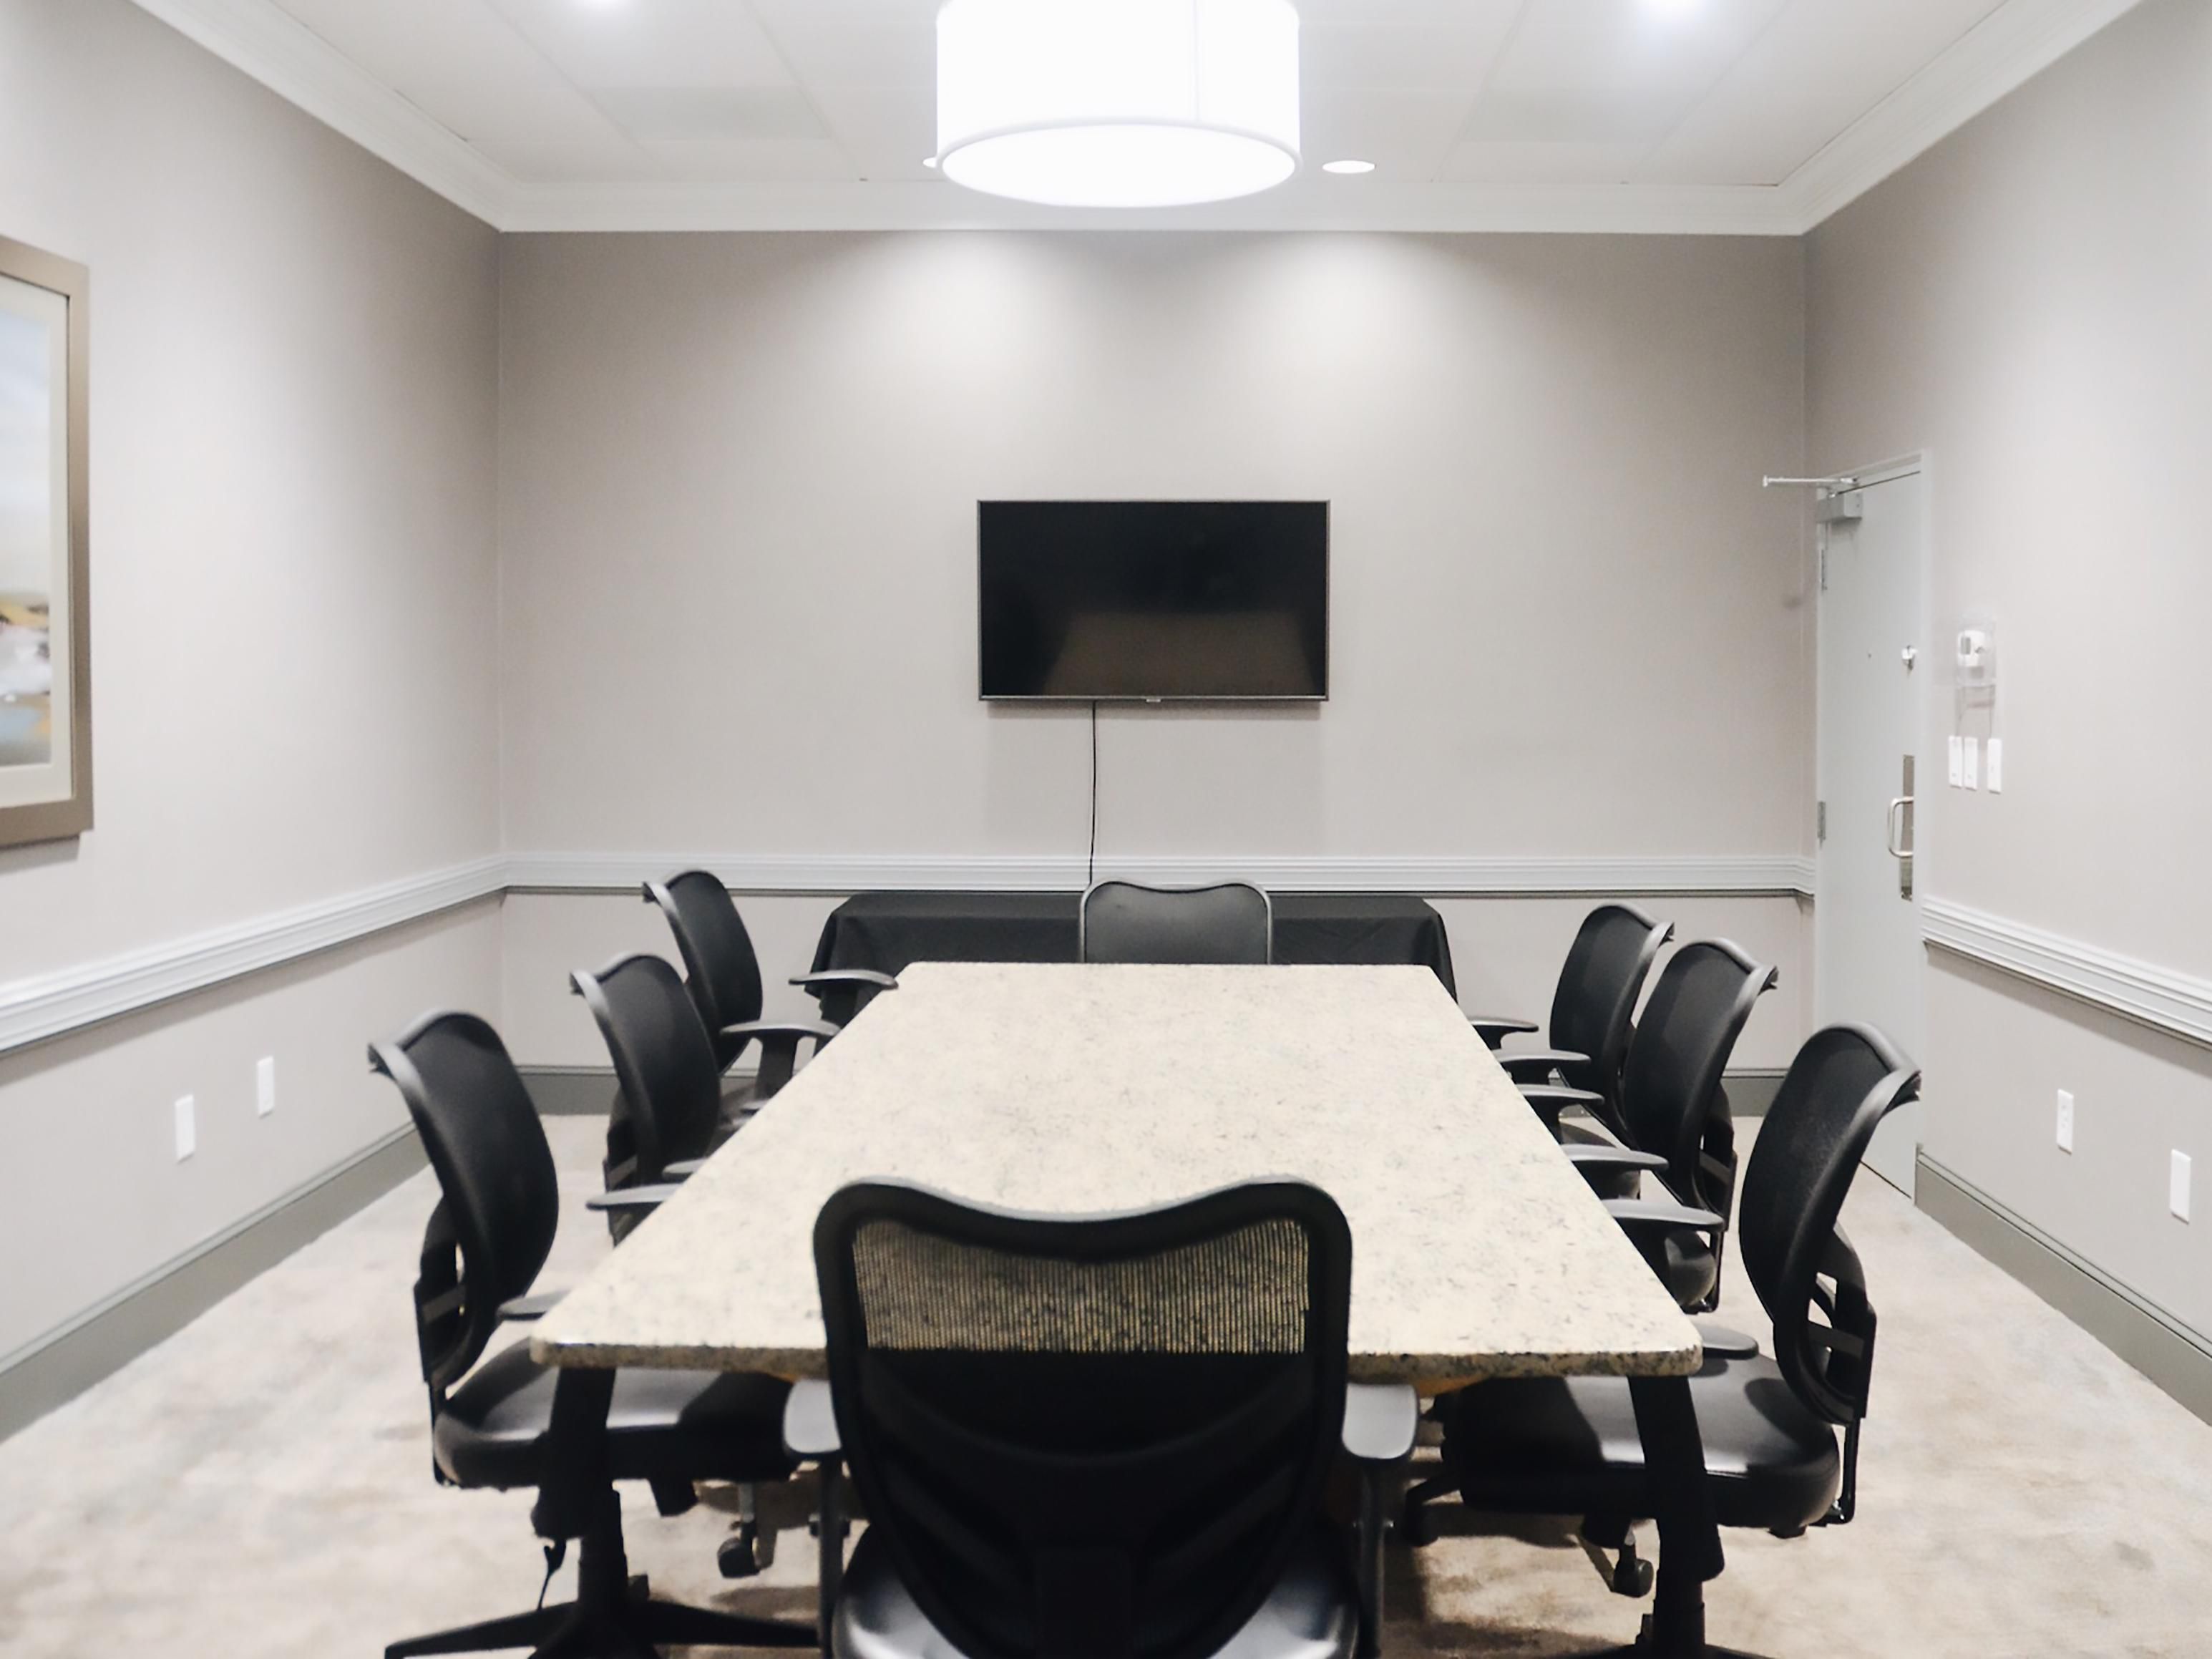 With our 2,000 square feet of meeting & event space, we can accommodate groups from 10 to 250. Full service catering, A/V equipment, and Wi-Fi internet access are available to make your next meeting easy to plan.